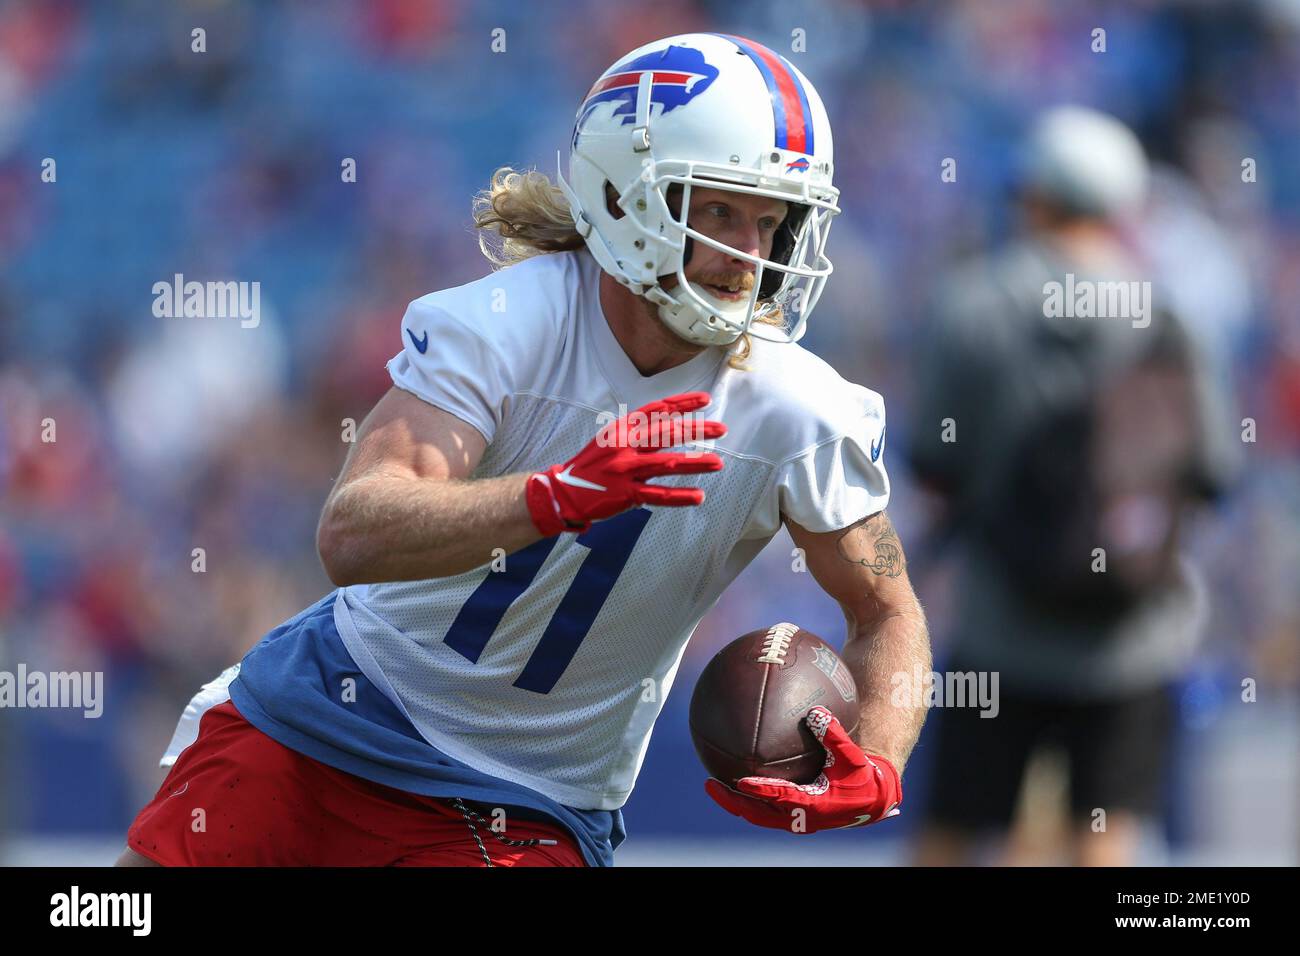 Buffalo Bills wide receiver Cole Beasley (11) runs after a catch during  practice at NFL football training camp in Orchard Park, N.Y., on Saturday,  July 31, 2021. (AP Photo/Joshua Bessex Stock Photo - Alamy